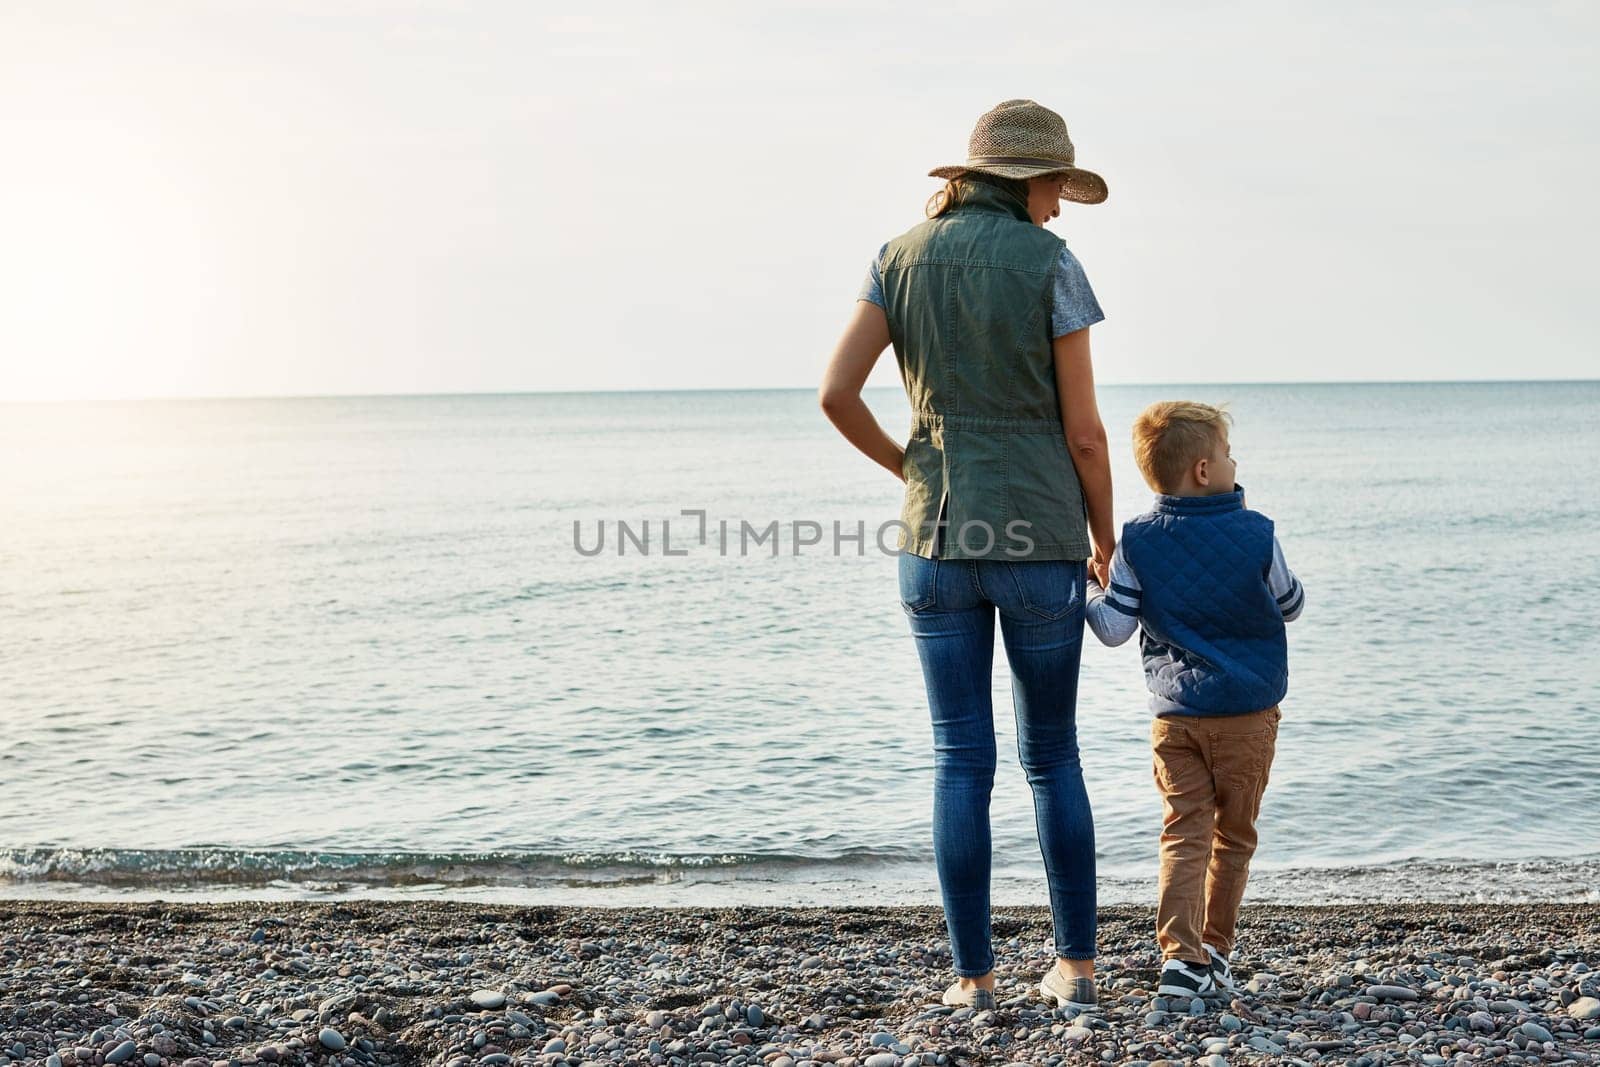 Admiring the beauty of nature. a young woman and her son enjoying a walk by the water. by YuriArcurs